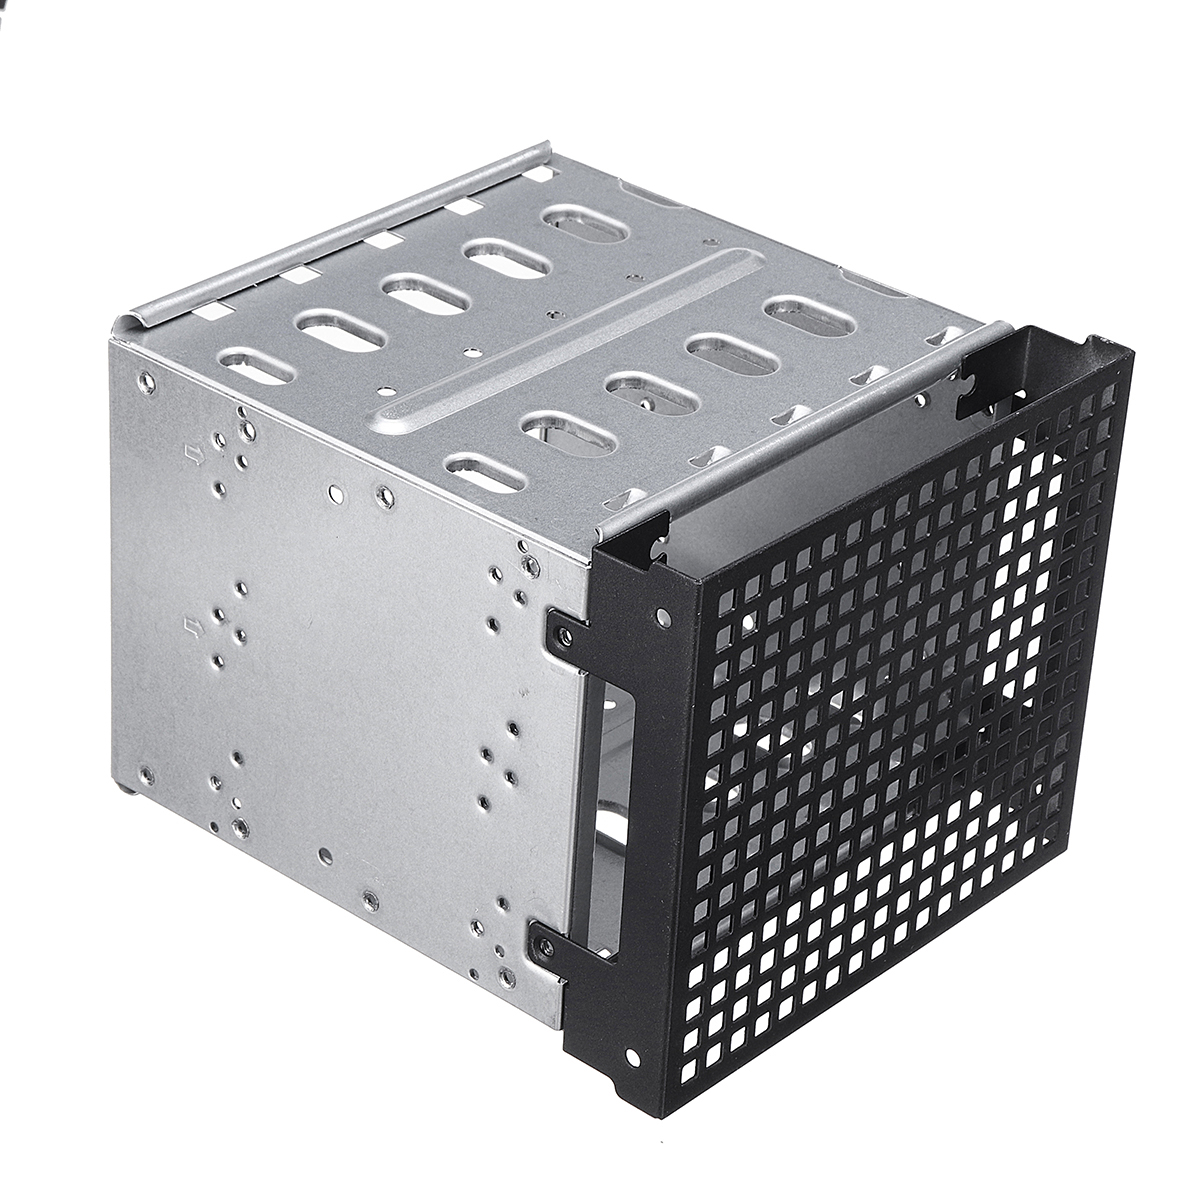 5.25" to 5x 3.5" SATA SAS HDD Cage Rack Hard Drive Tray Caddy Converter with Fan Space 21